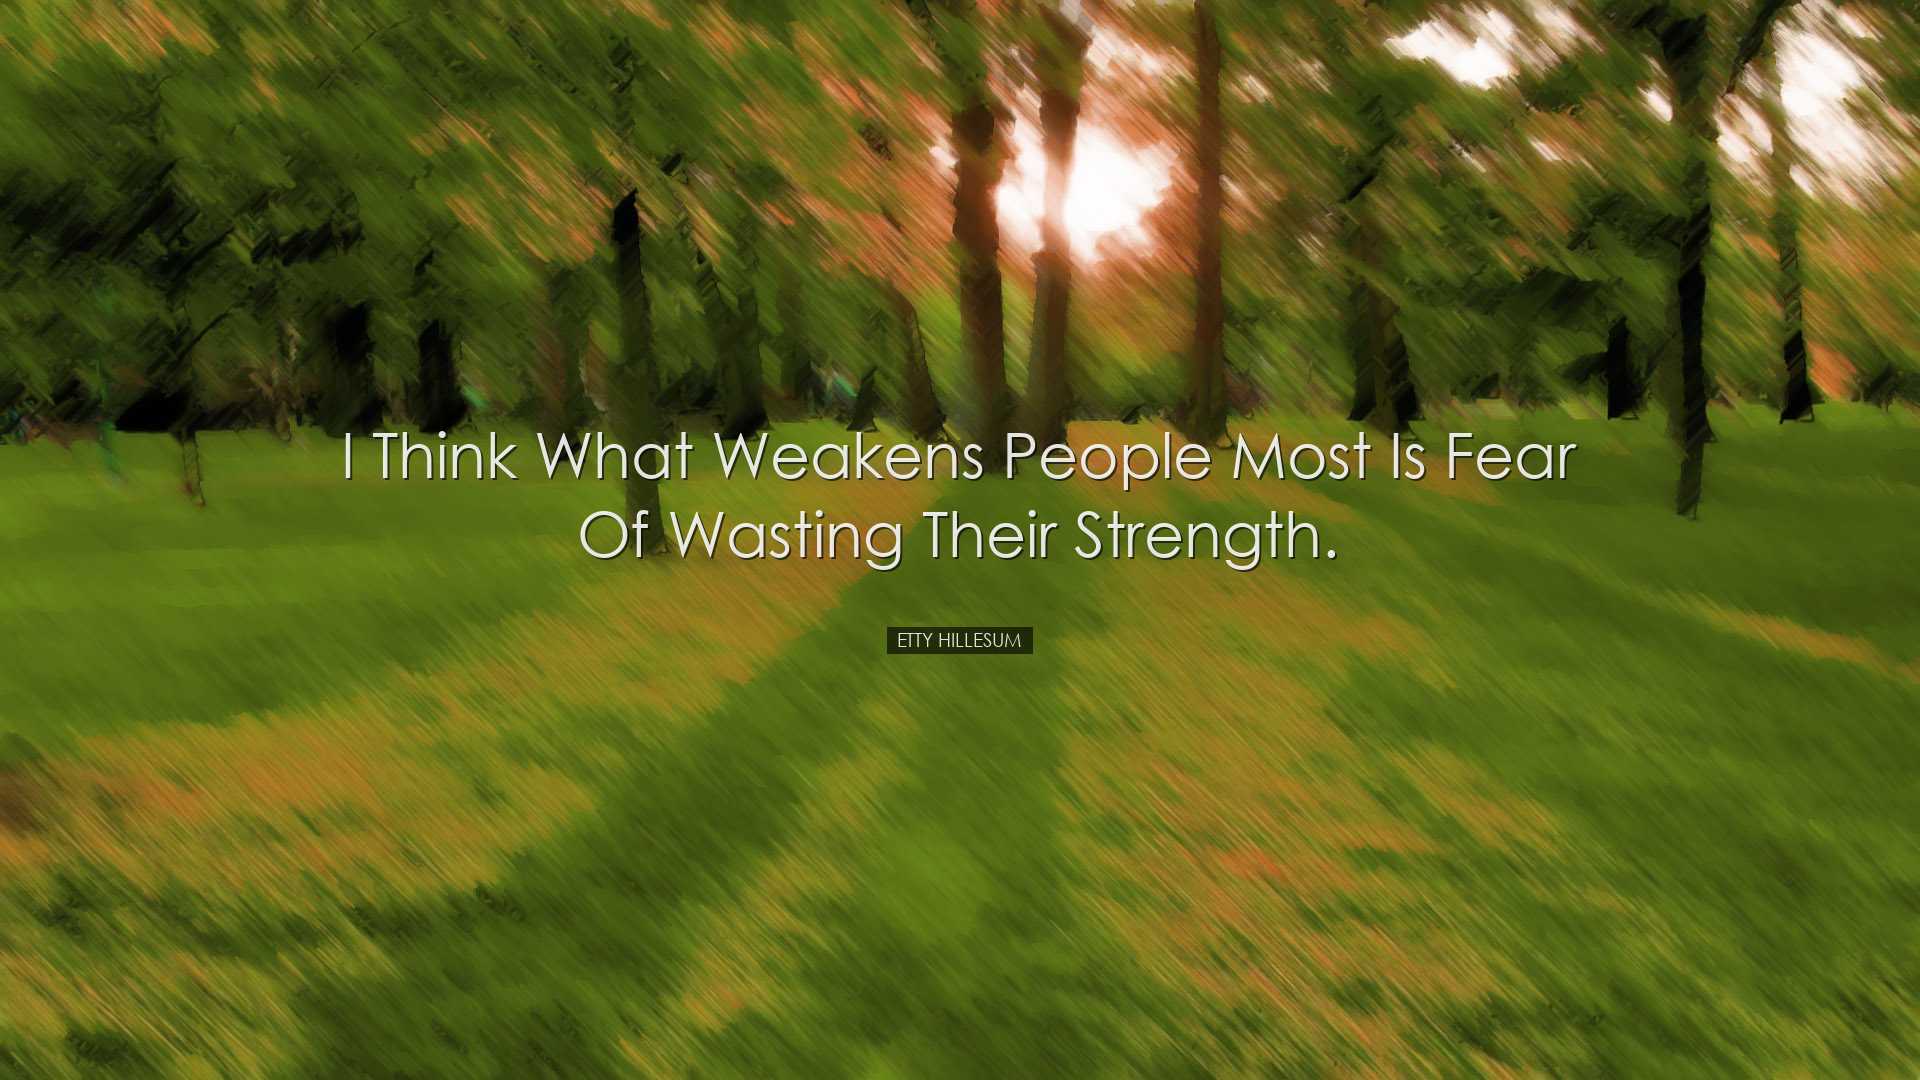 I think what weakens people most is fear of wasting their strength